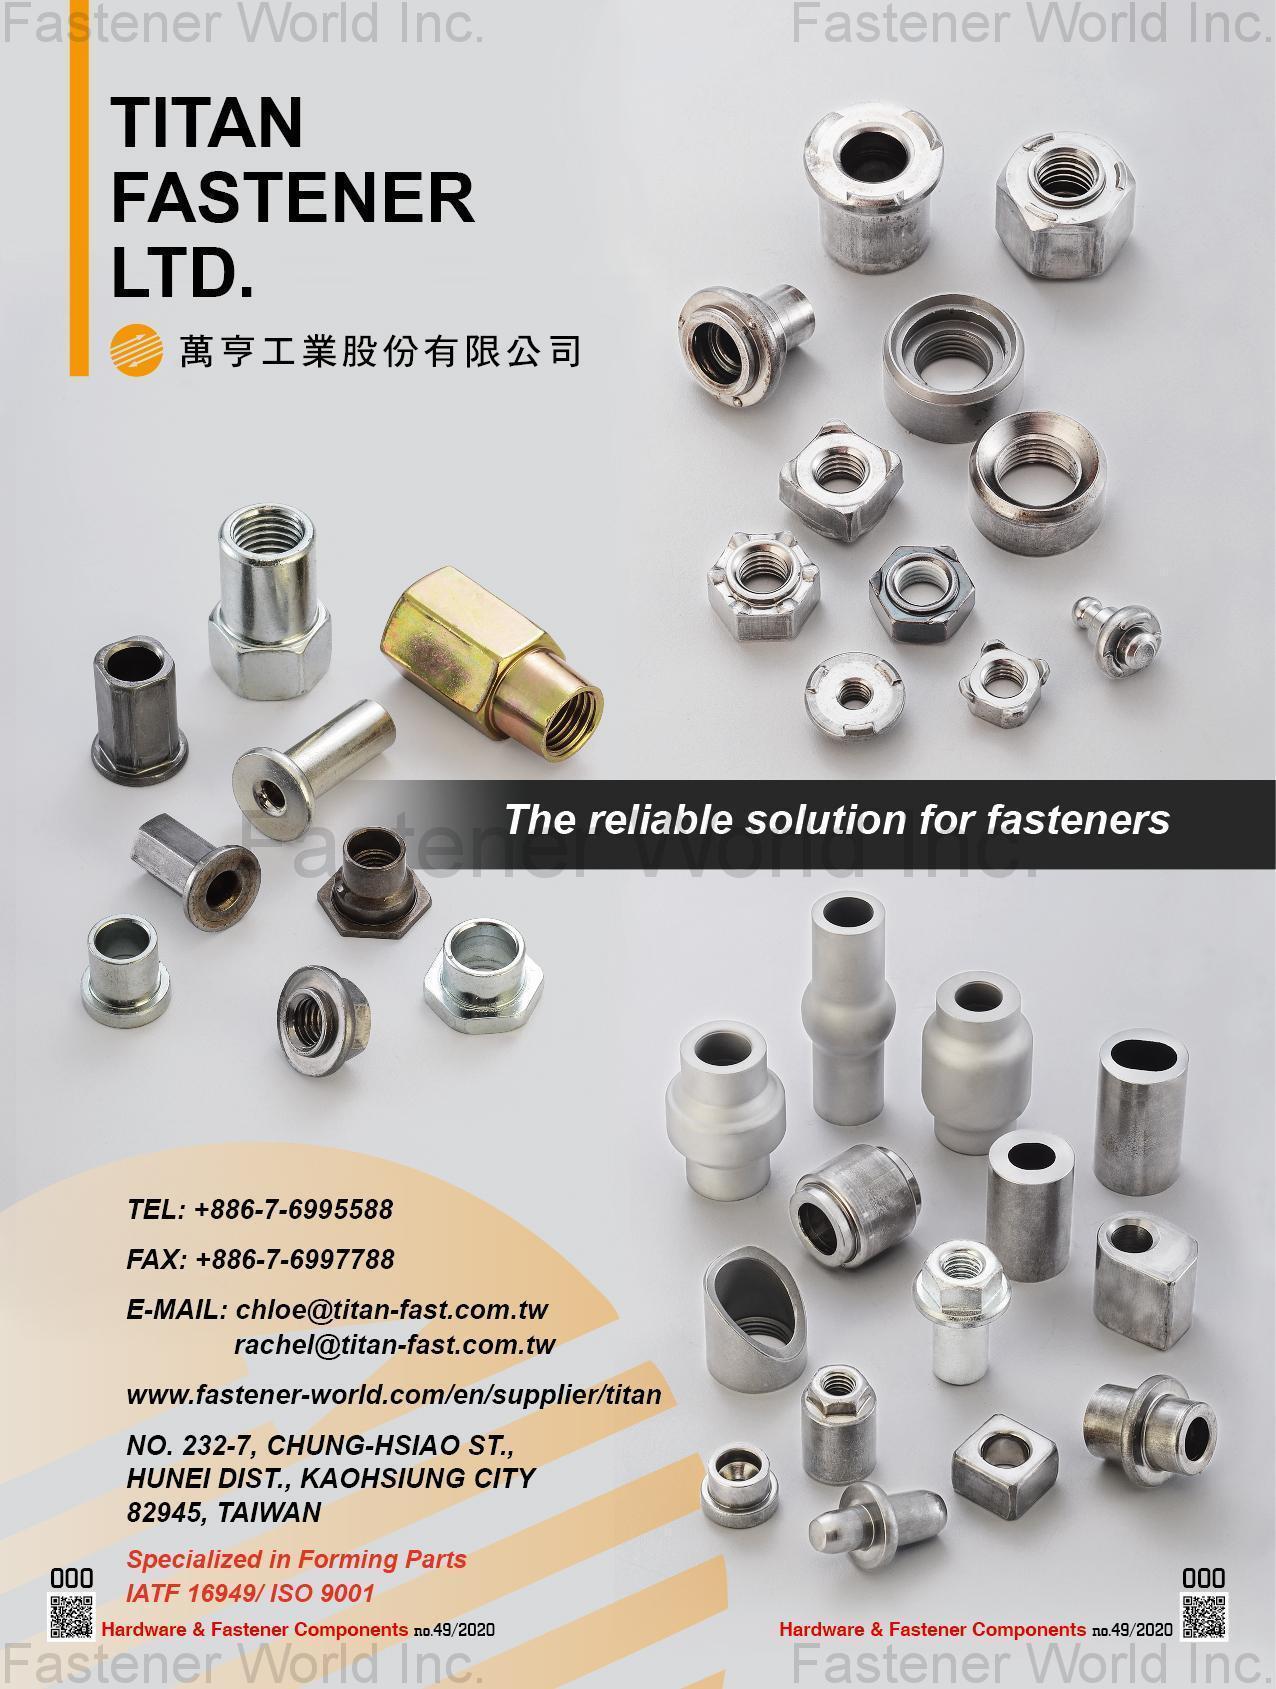 TITAN FASTENER LTD. , Cold Forming Part, Cold Forming Tube, Tubes, Machining Part, Stamping Part, Automotive Fastener, Aluminum Parts, Brass Part , Special Cold / Hot Forming Parts